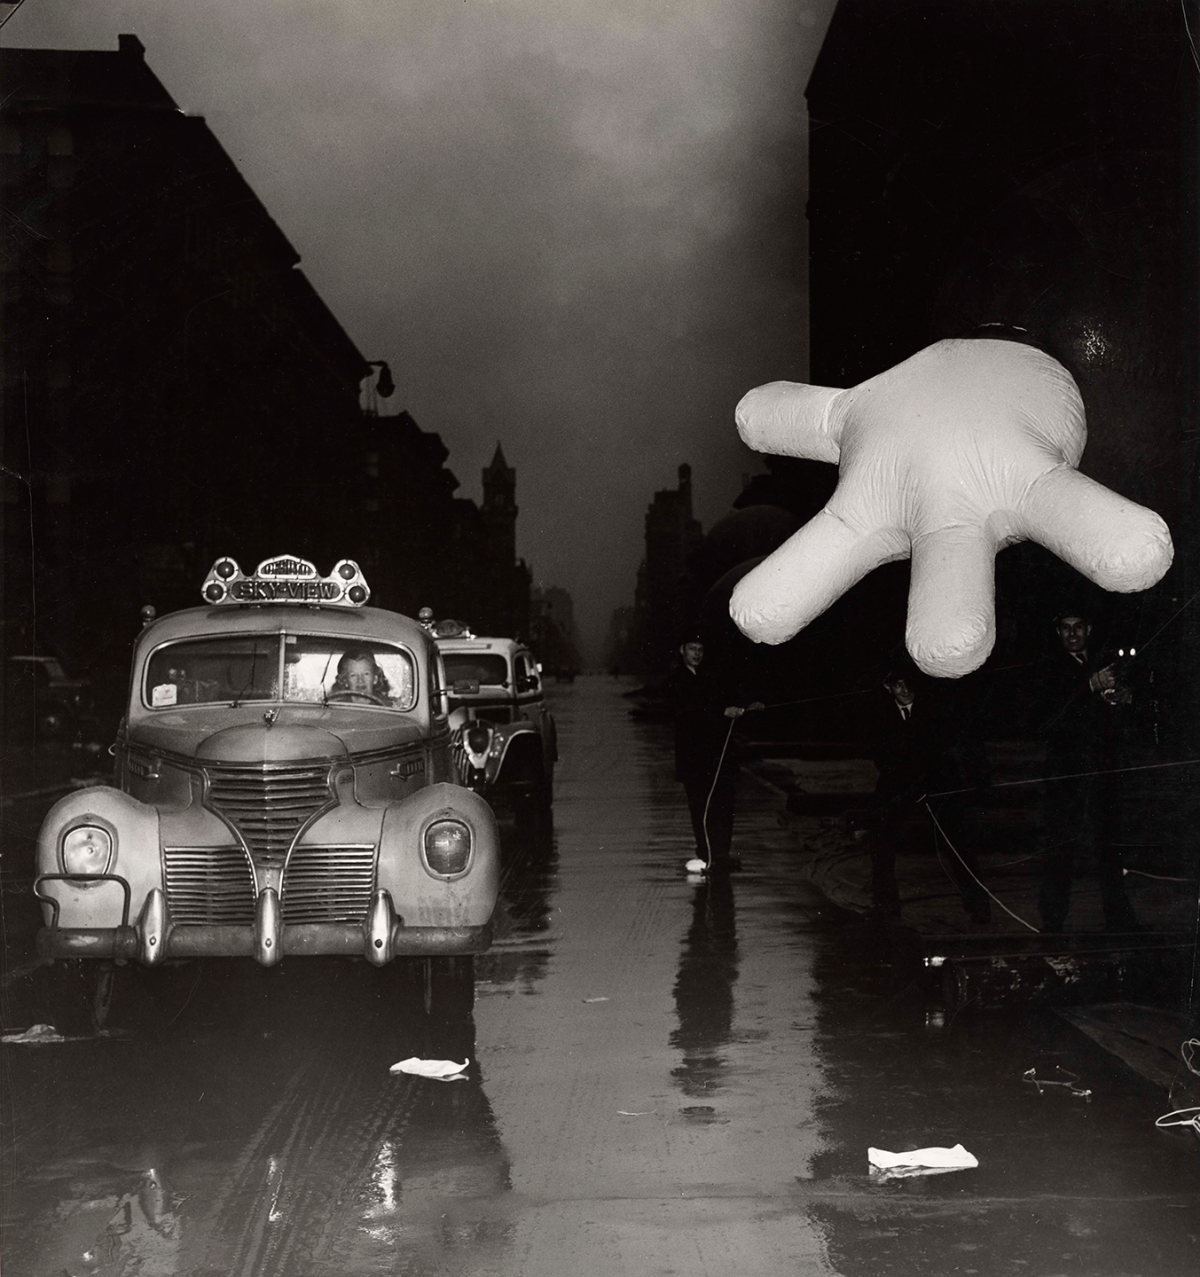 The Raw Beauty And Pain Of New York City From 1930S-1950S Through The Lens Of Weegee